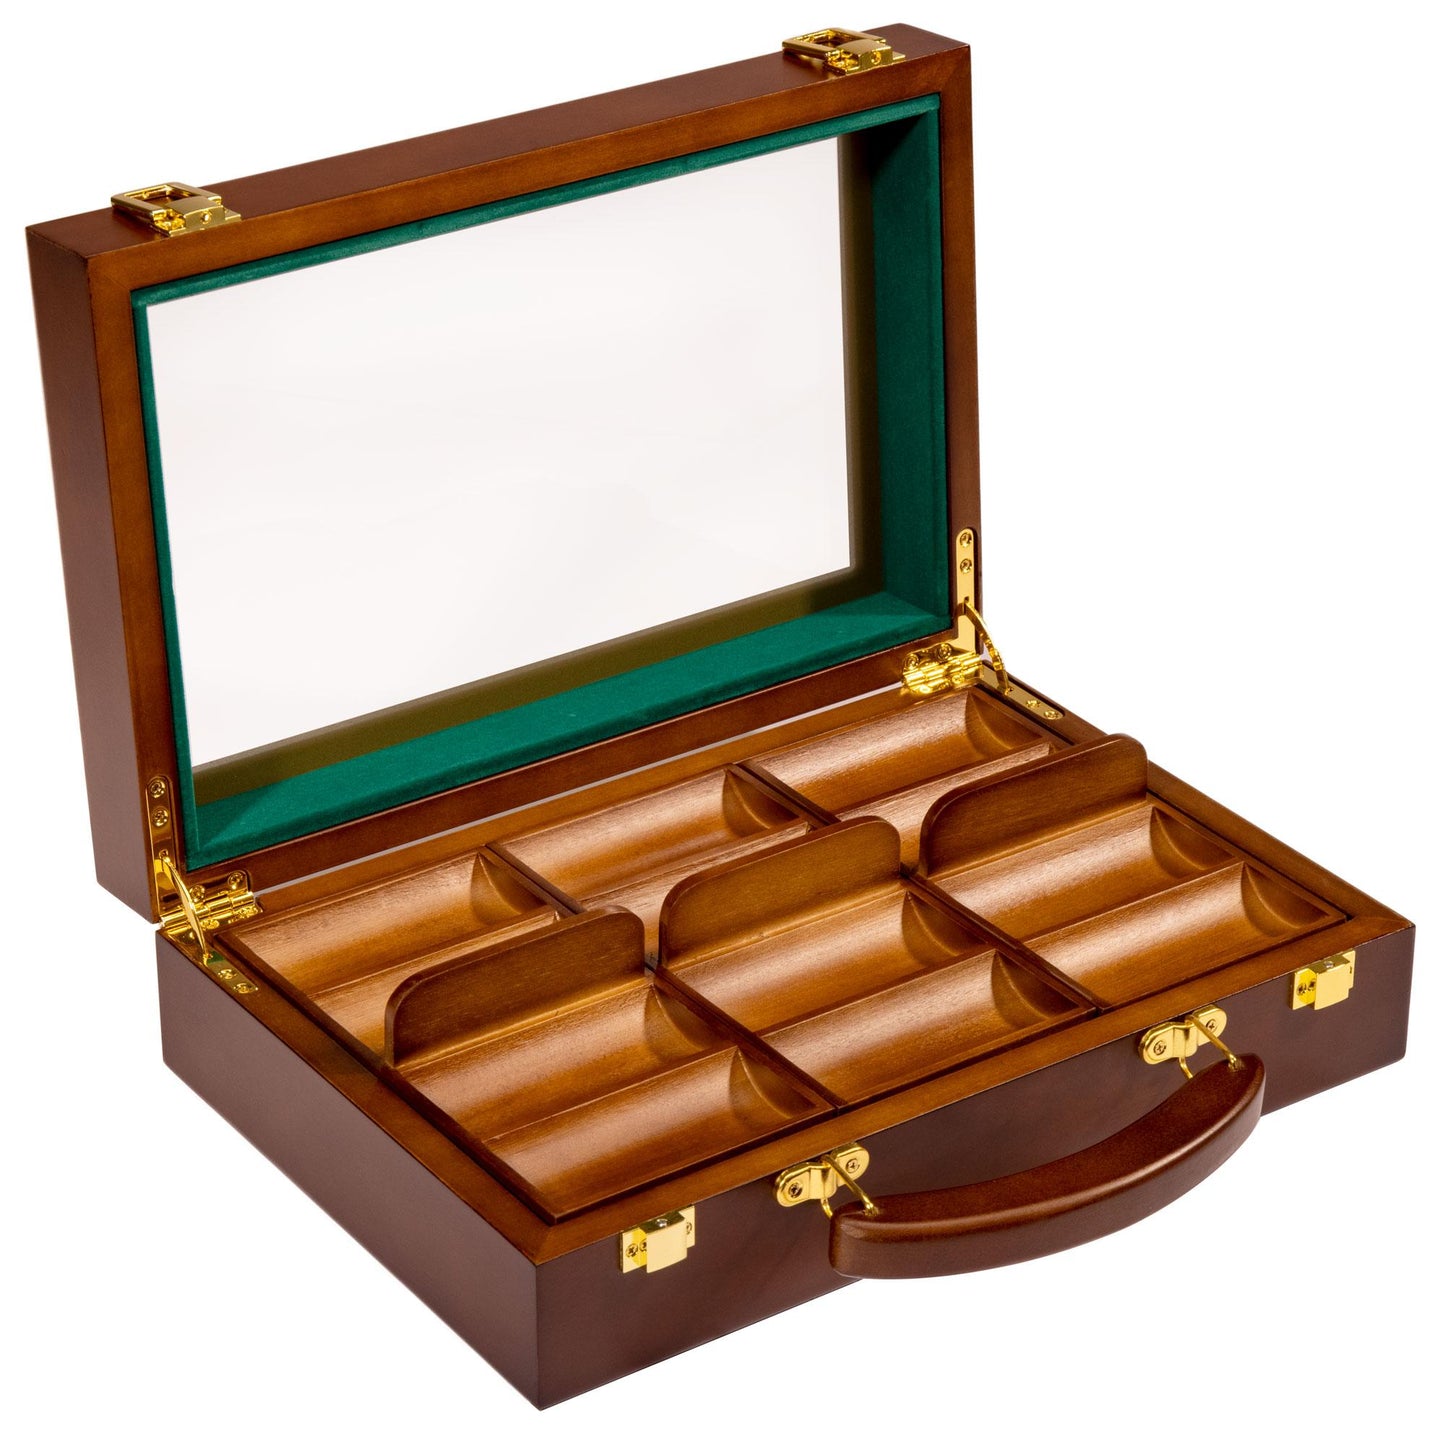 300 Crown and Dice Poker Chips with Walnut Case